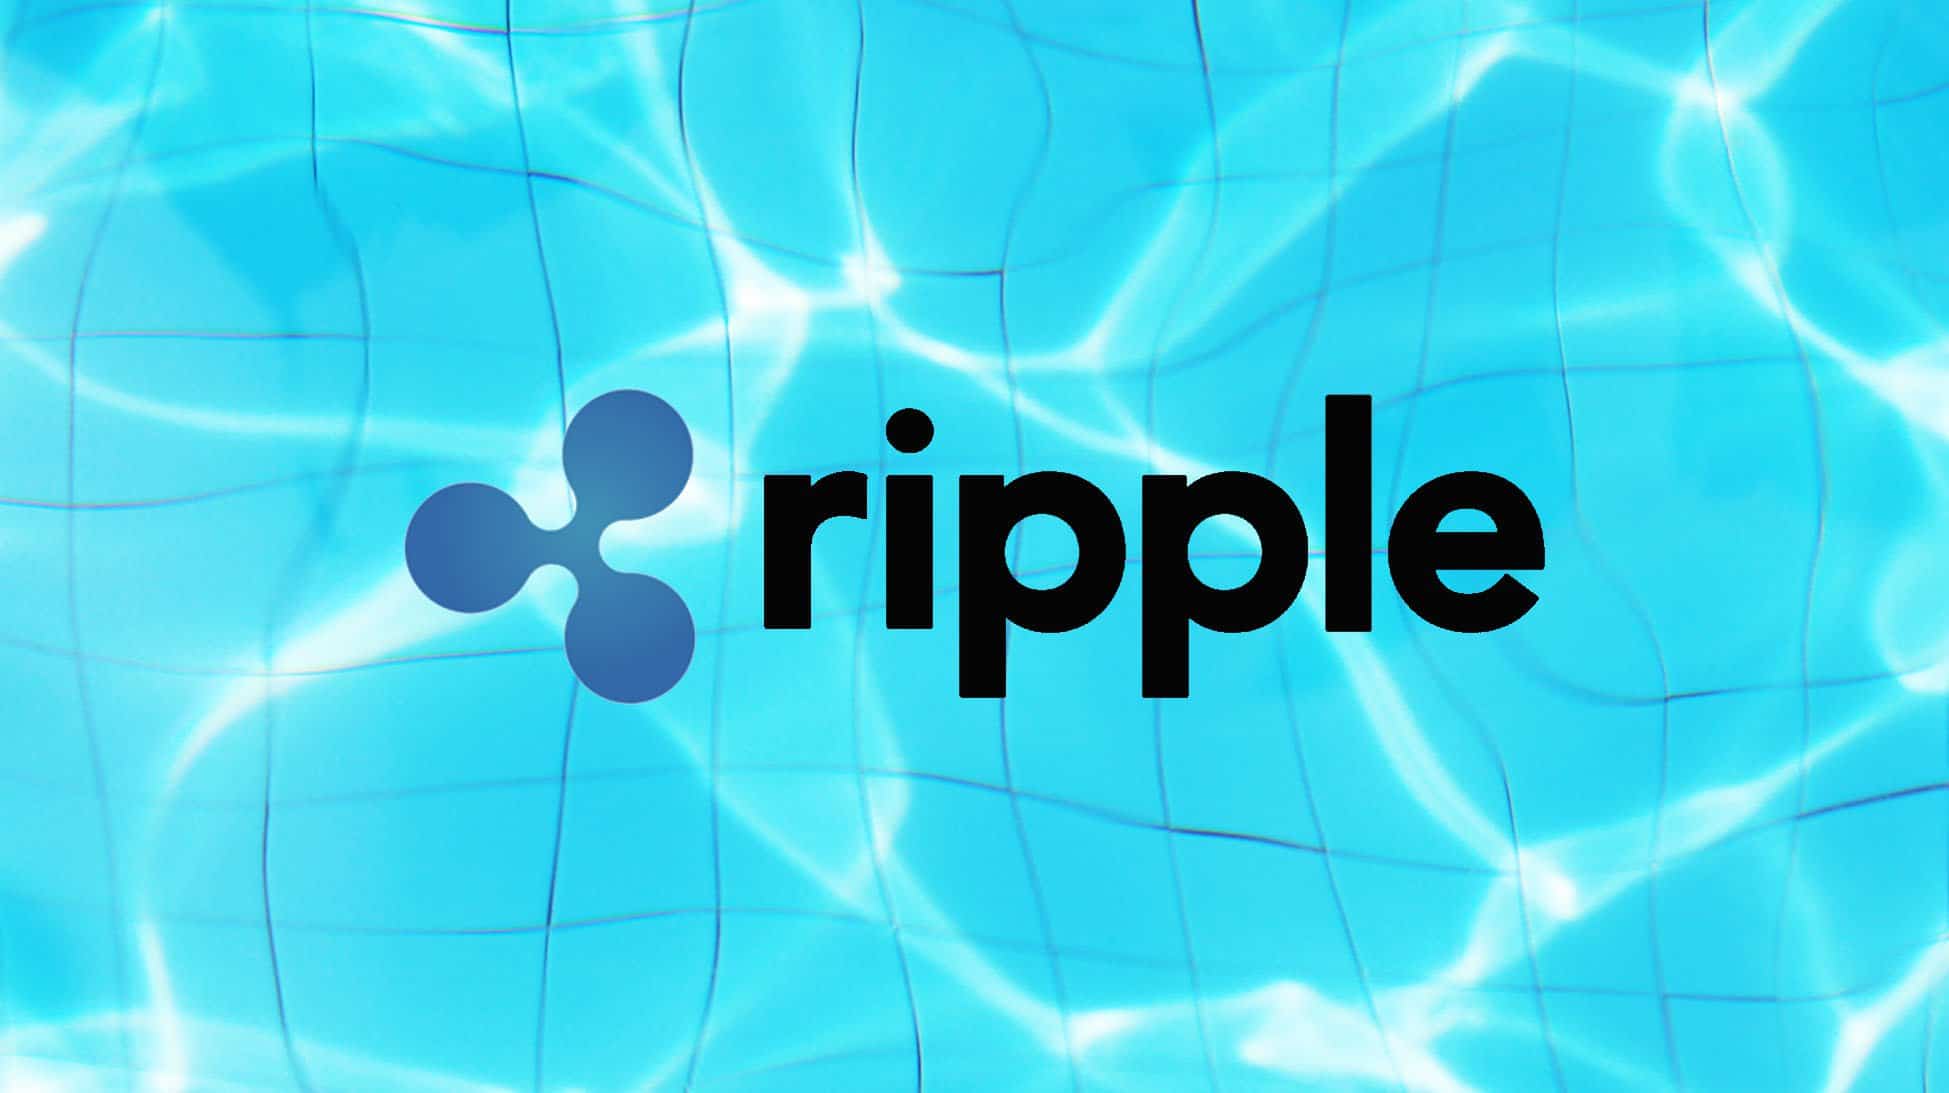 Ripple Continues to Sign New Customers, Claims CEO Garlinghouse